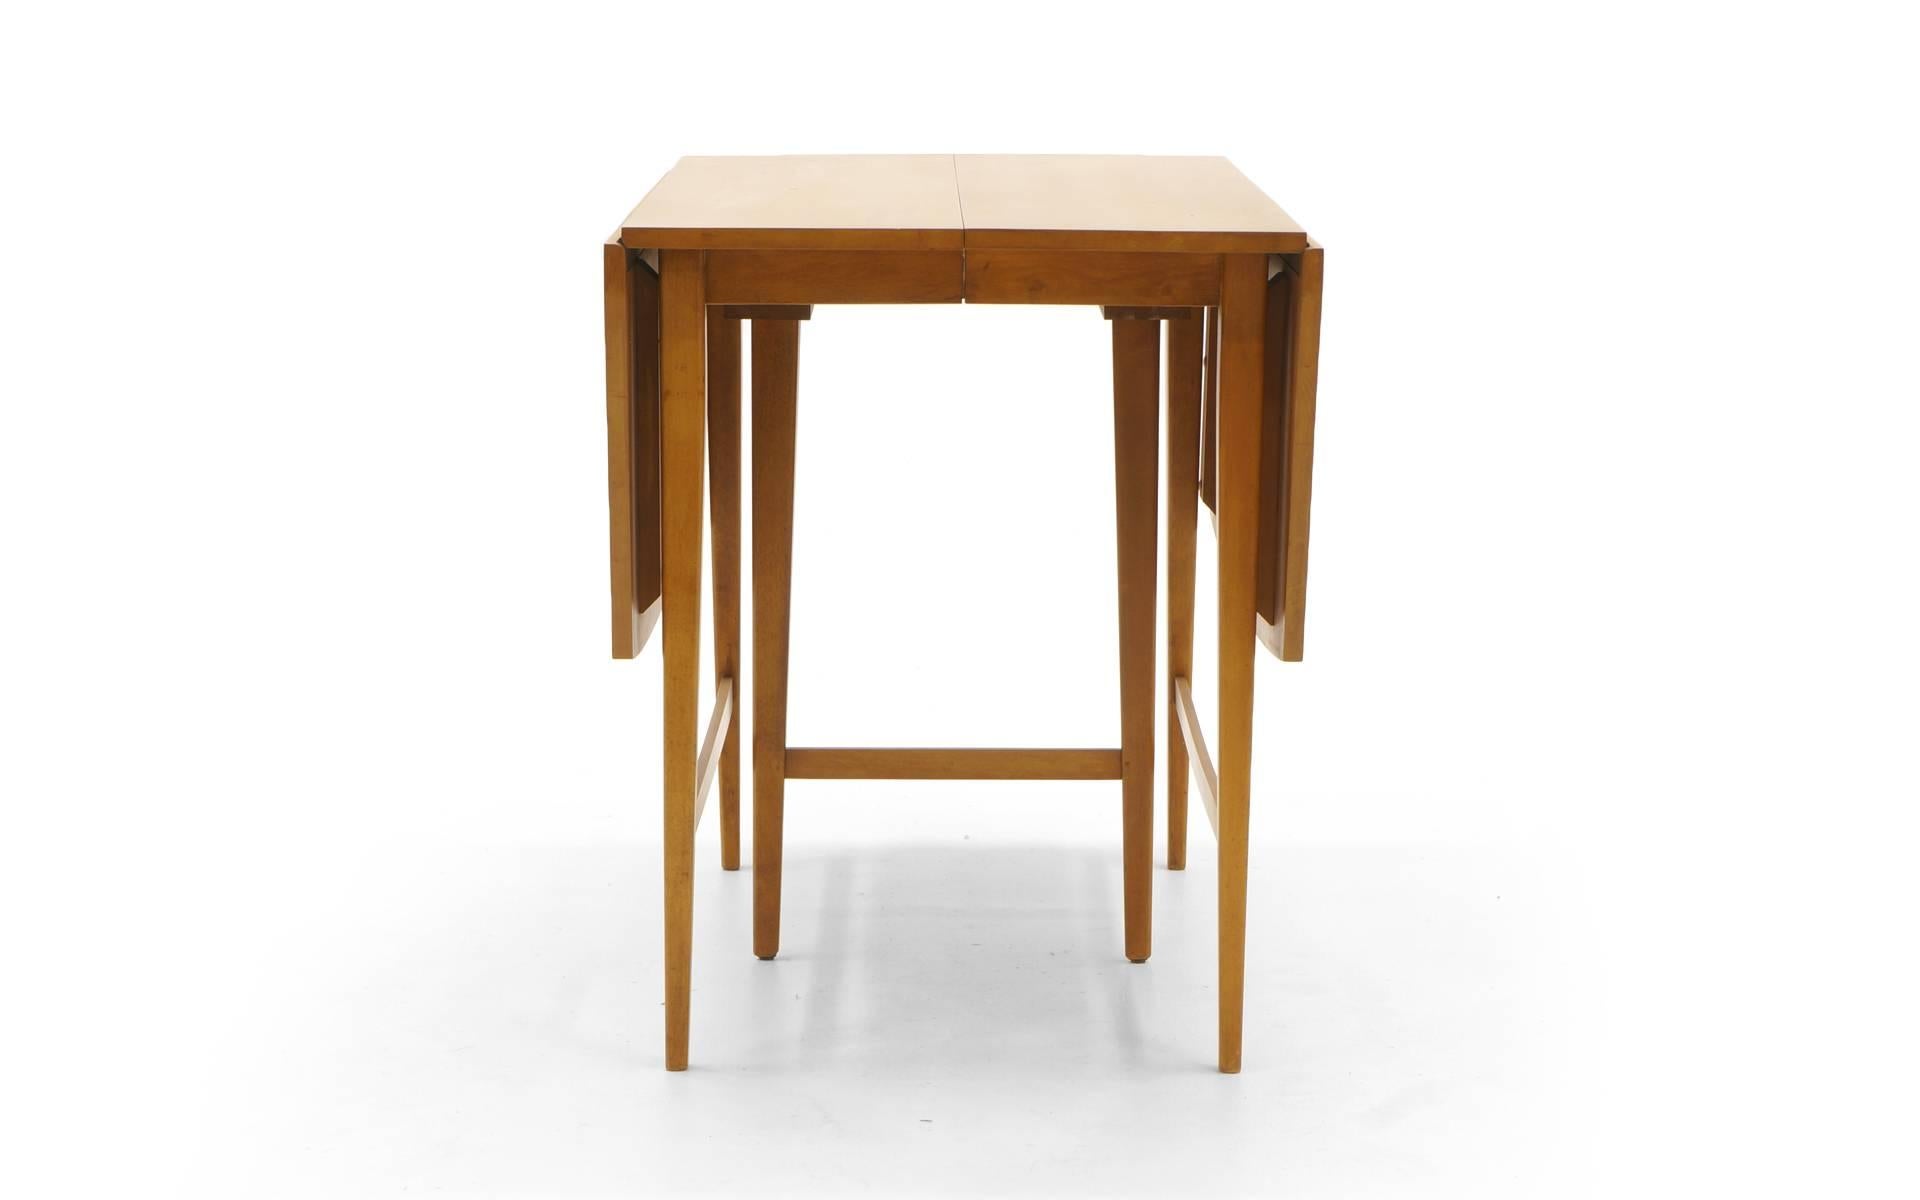 American Drop-Leaf Dining Table by Paul McCobb, Expandable with Three Leaves, Solid Maple